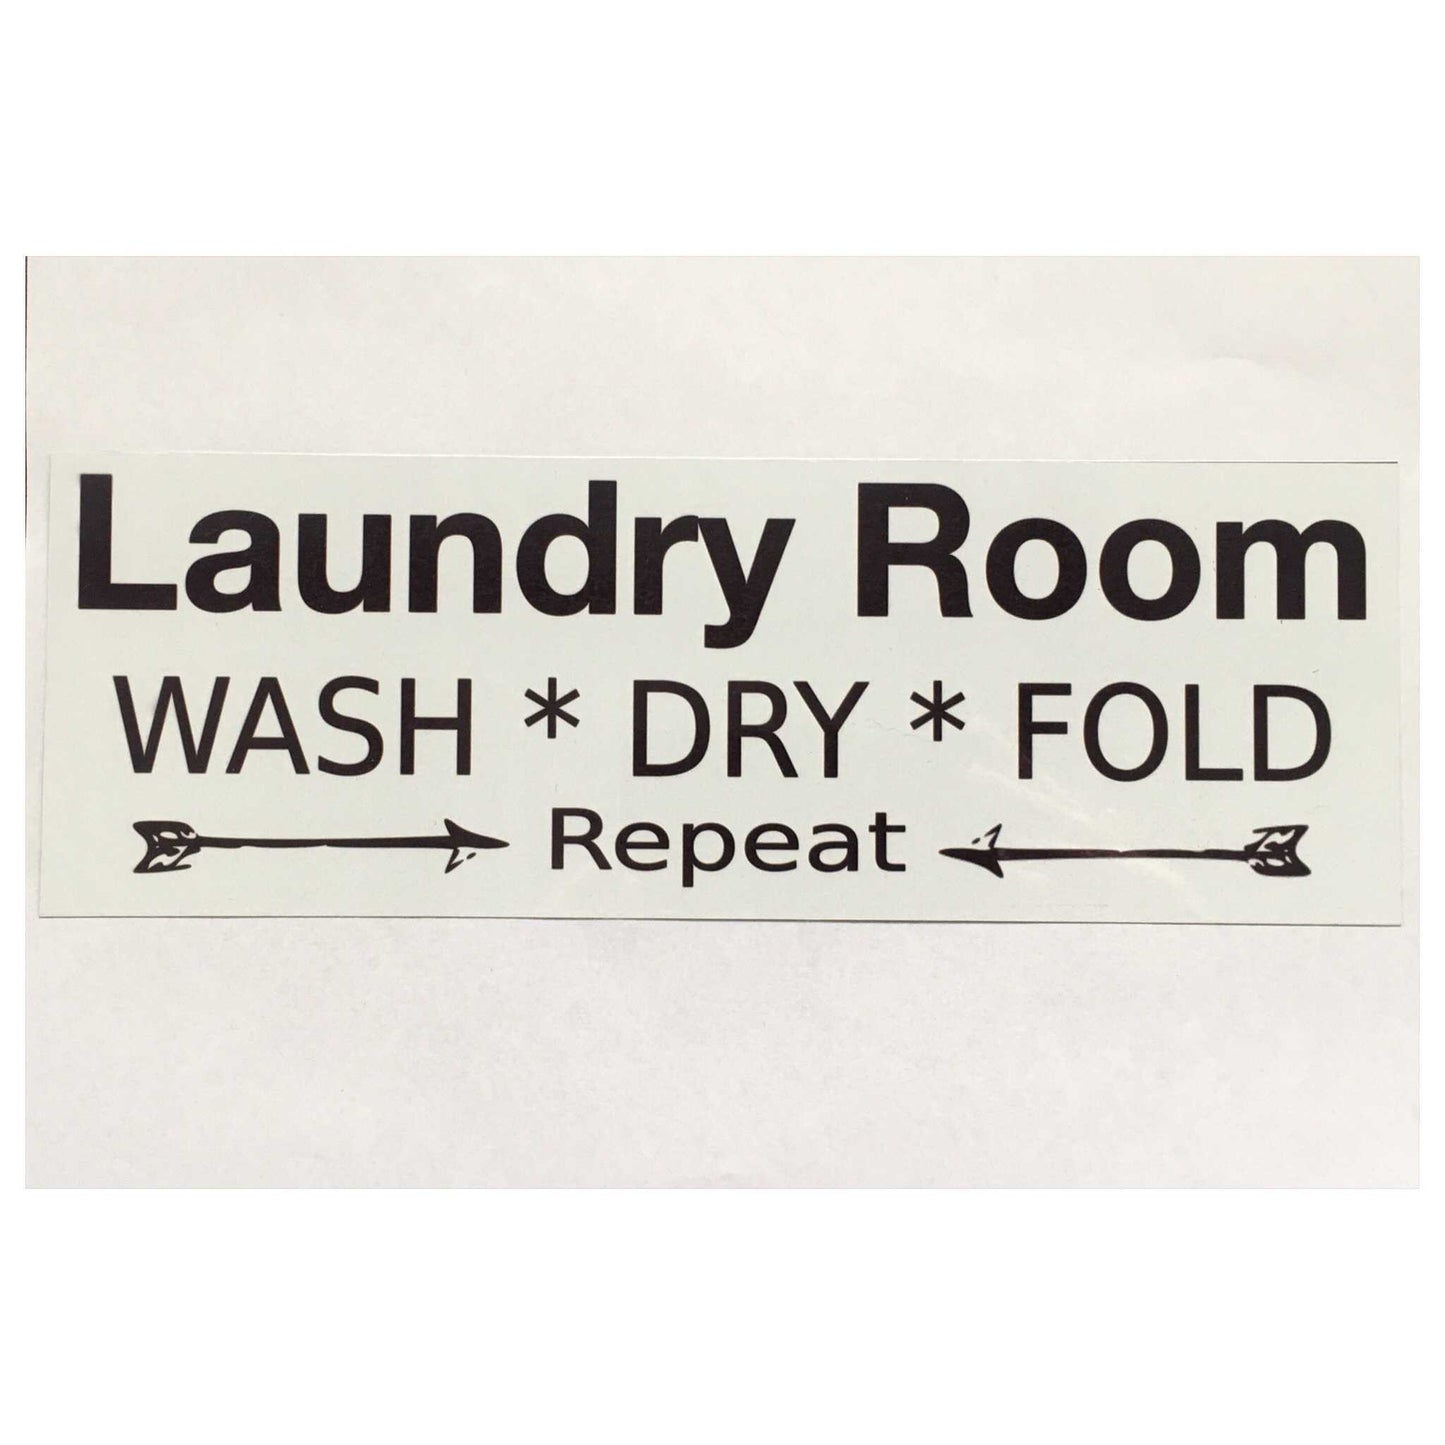 Laundry Room Wash Dry Fold Repeat White Sign